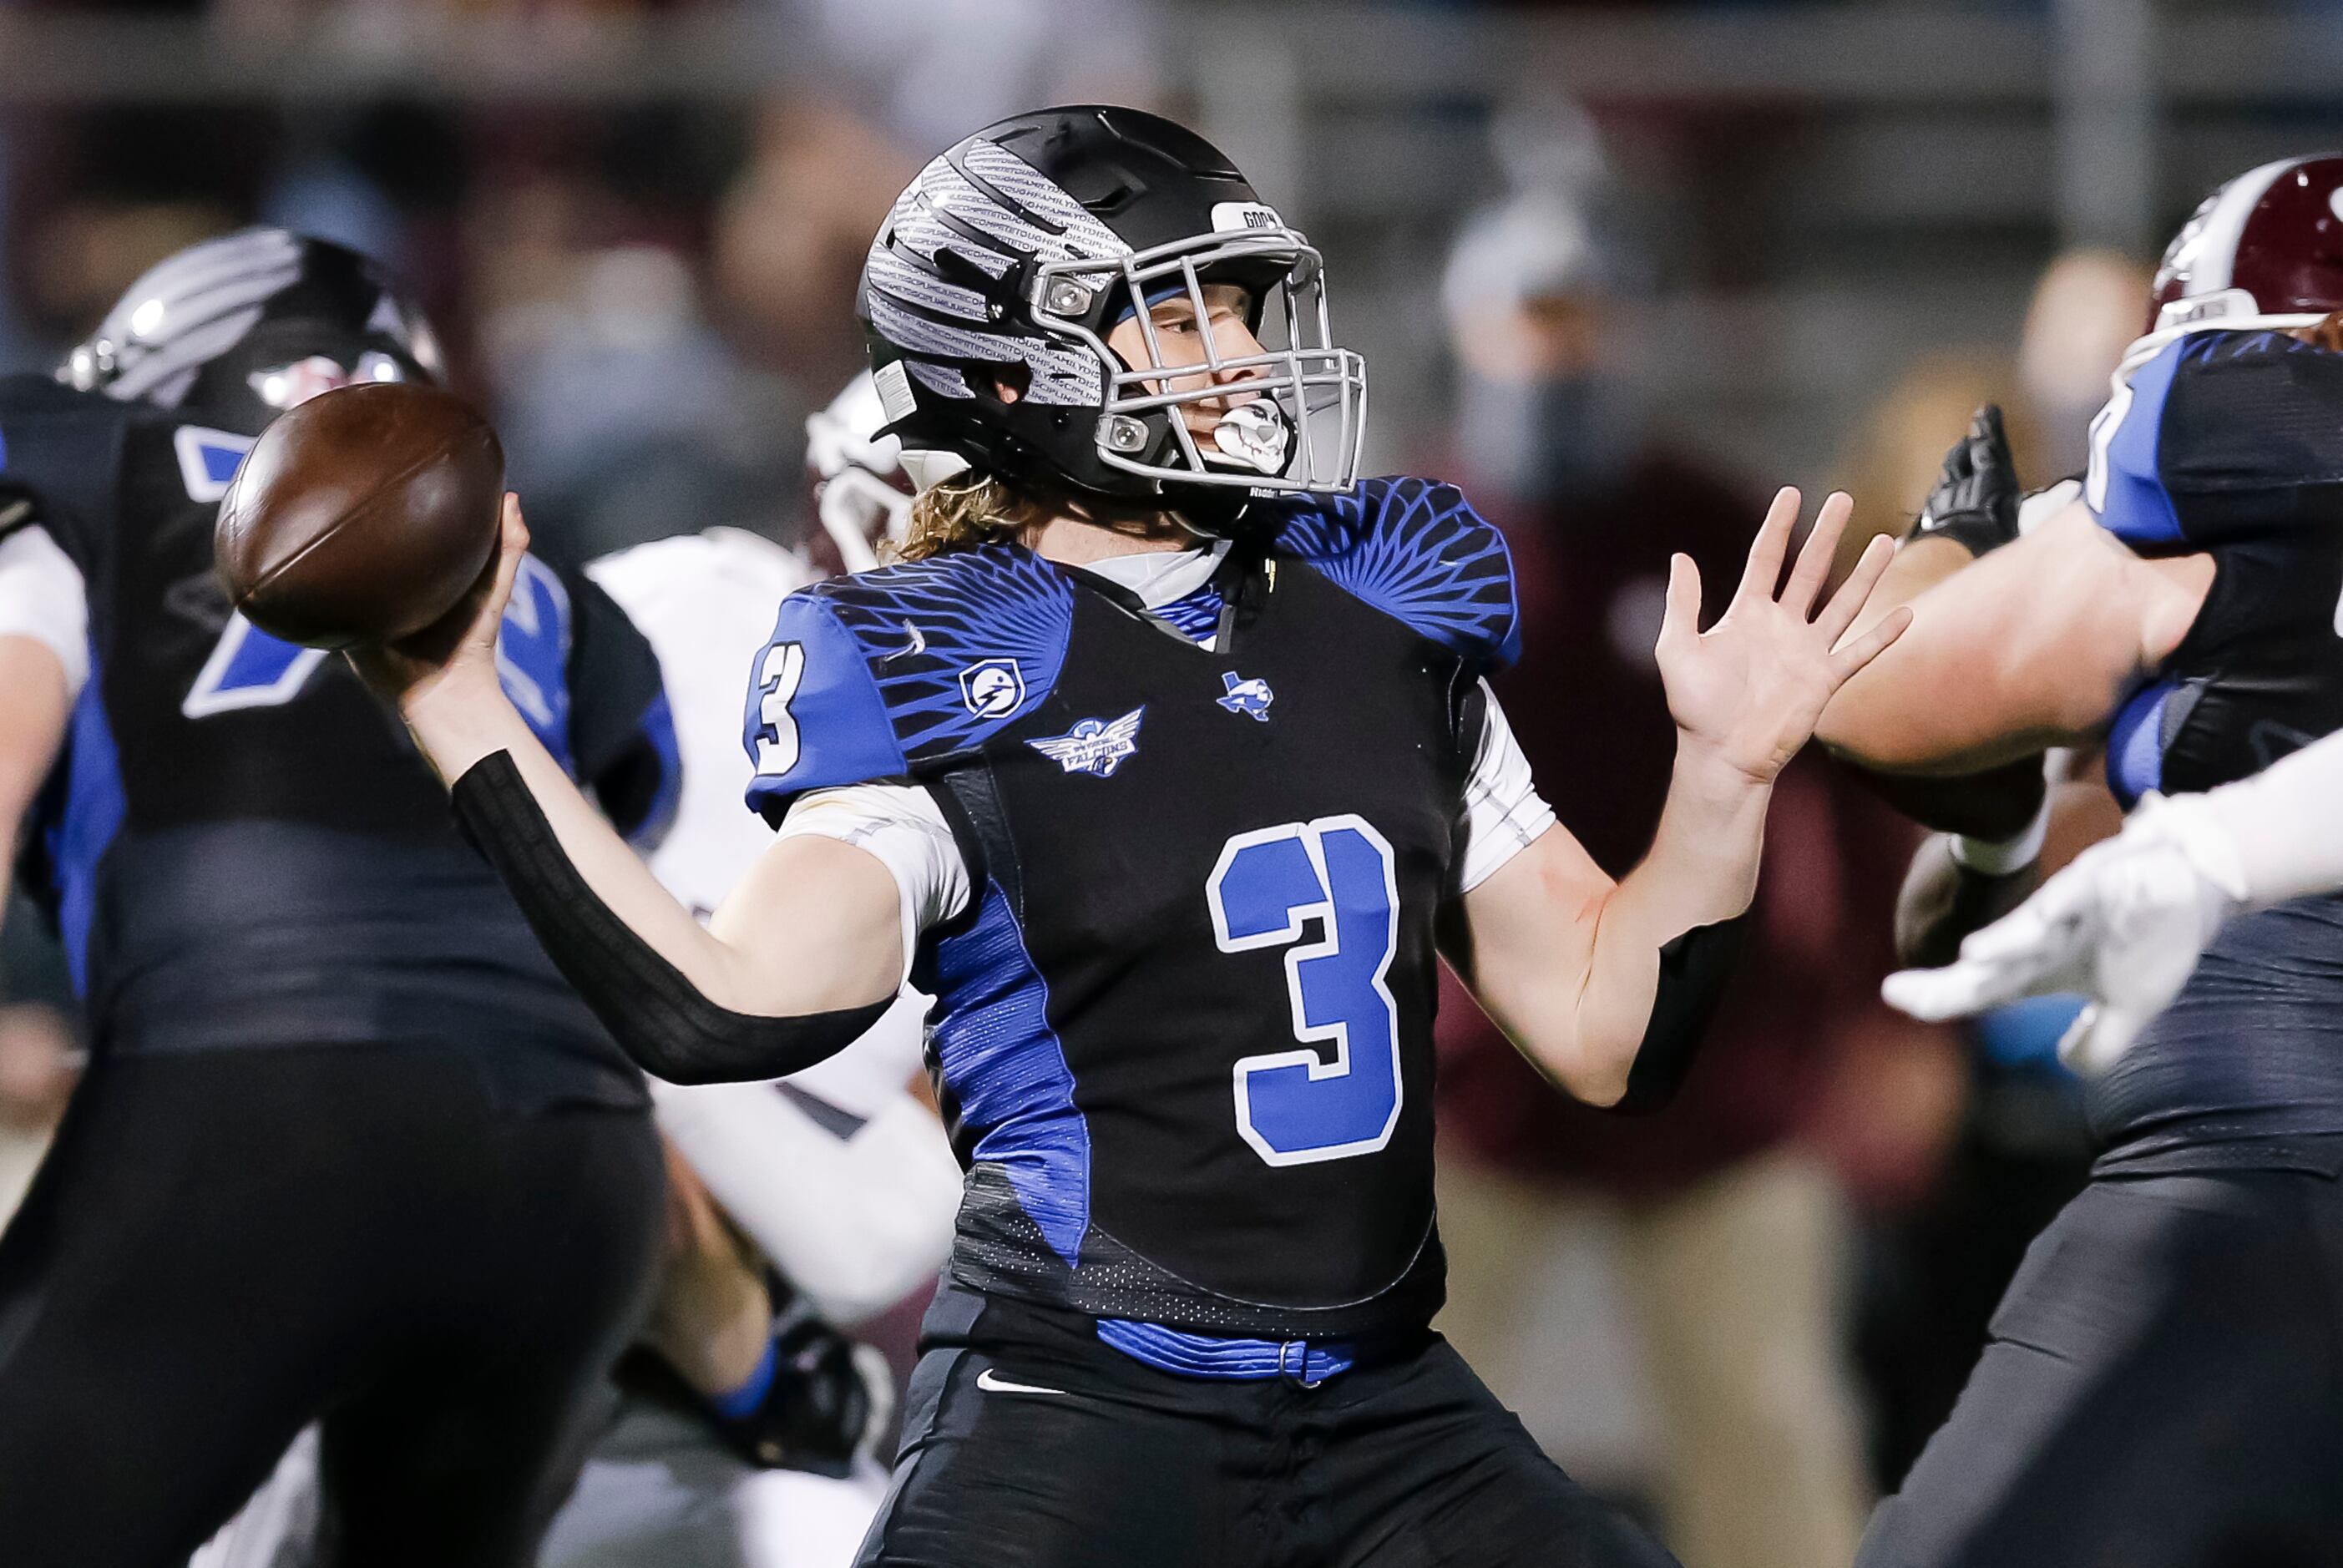 North Forney senior quarterback Jacob Acuna throws during the first half of a high school...